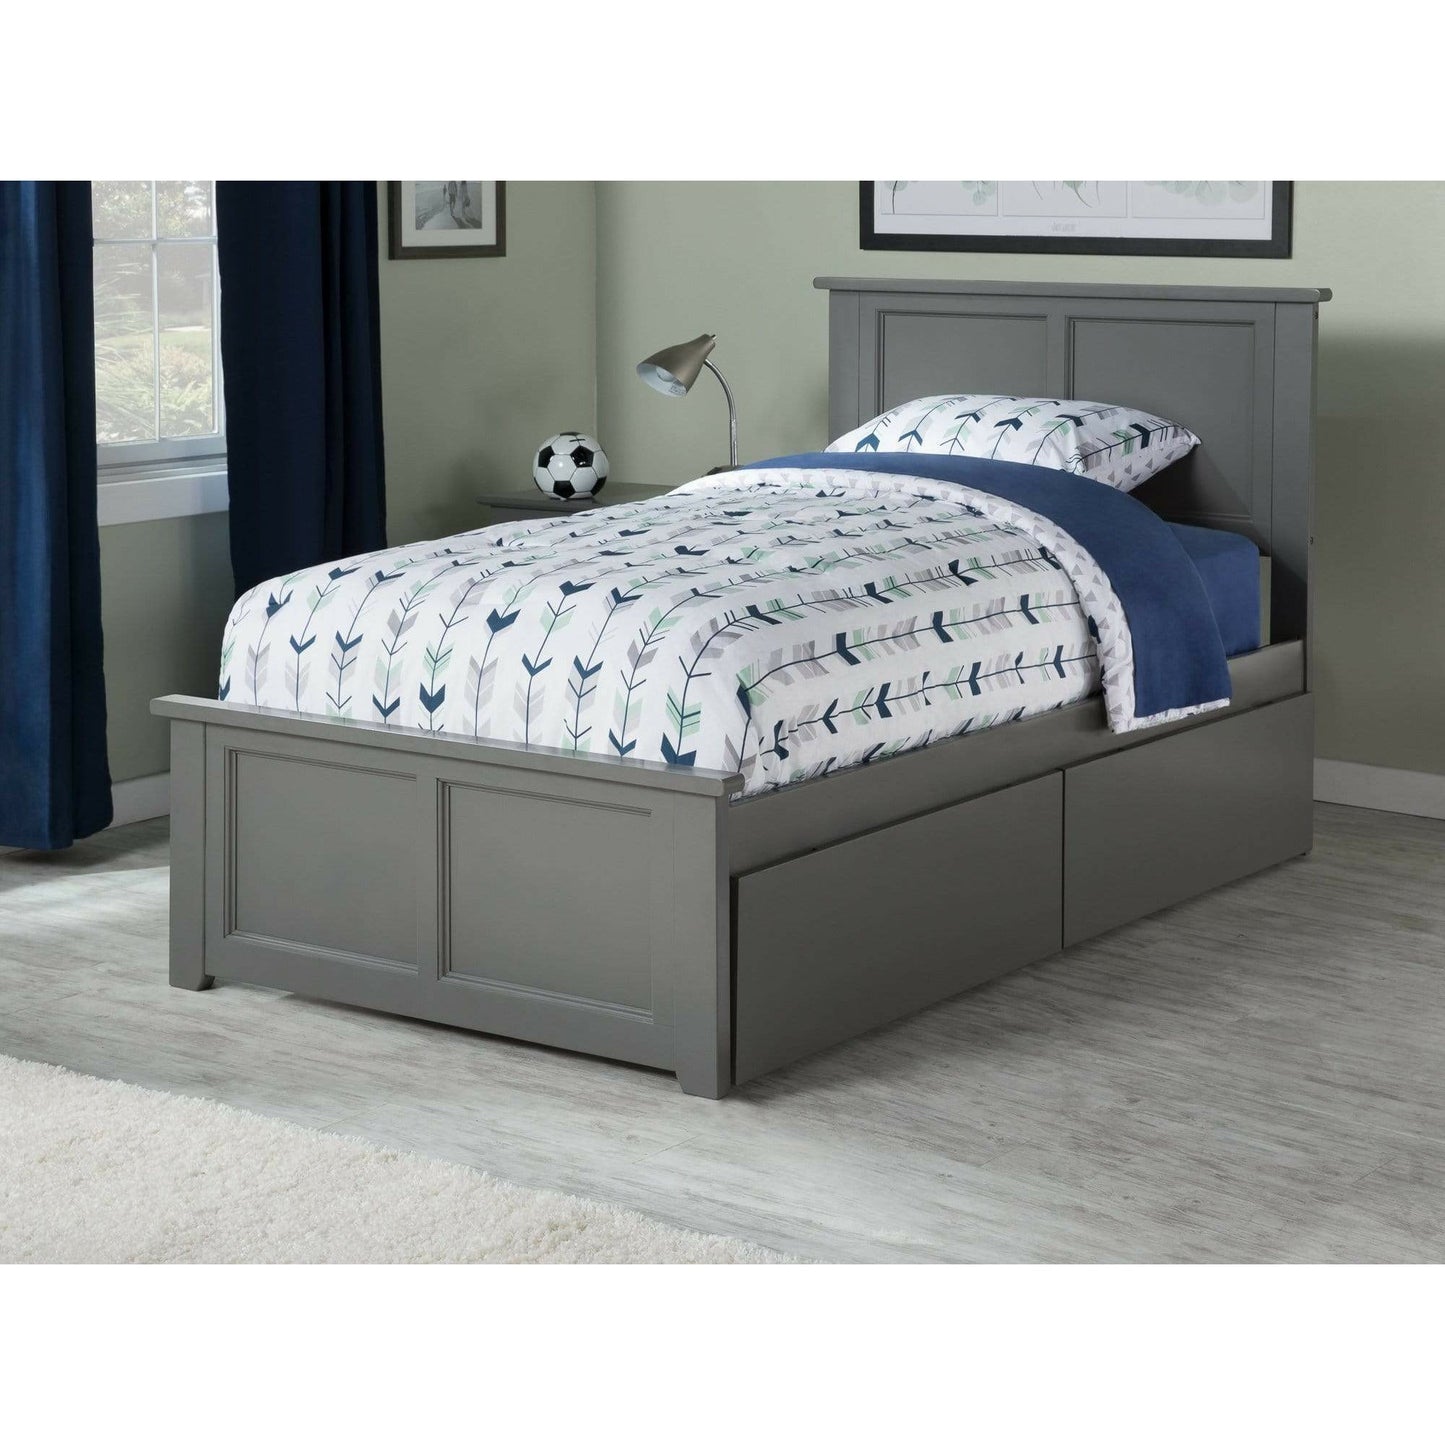 Atlantic Furniture Bed Grey Madison Twin Platform Bed with Matching Foot Board with 2 Urban Bed Drawers in Espresso